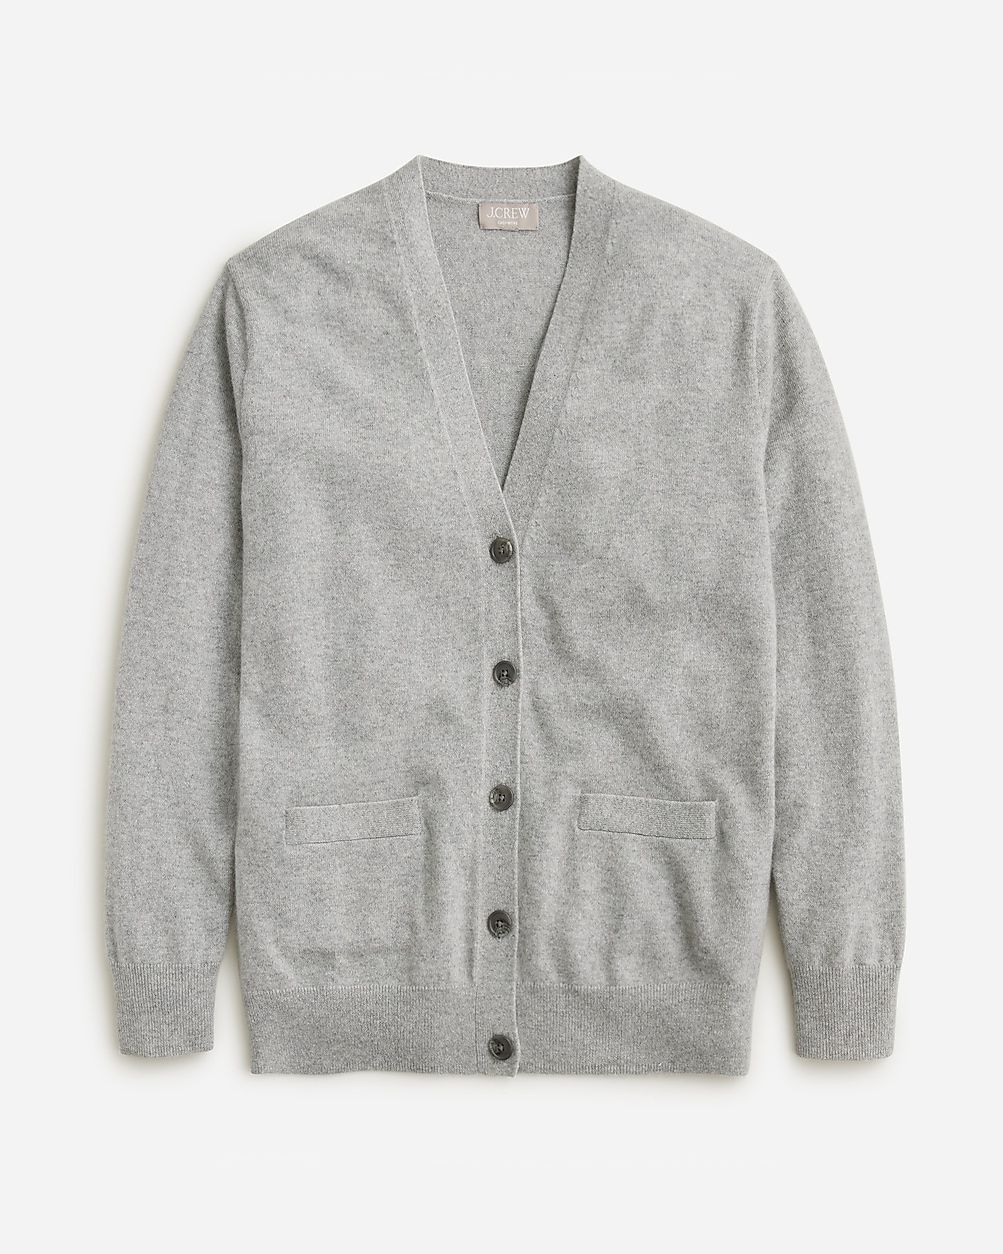 Cashmere relaxed cardigan sweater | J.Crew US